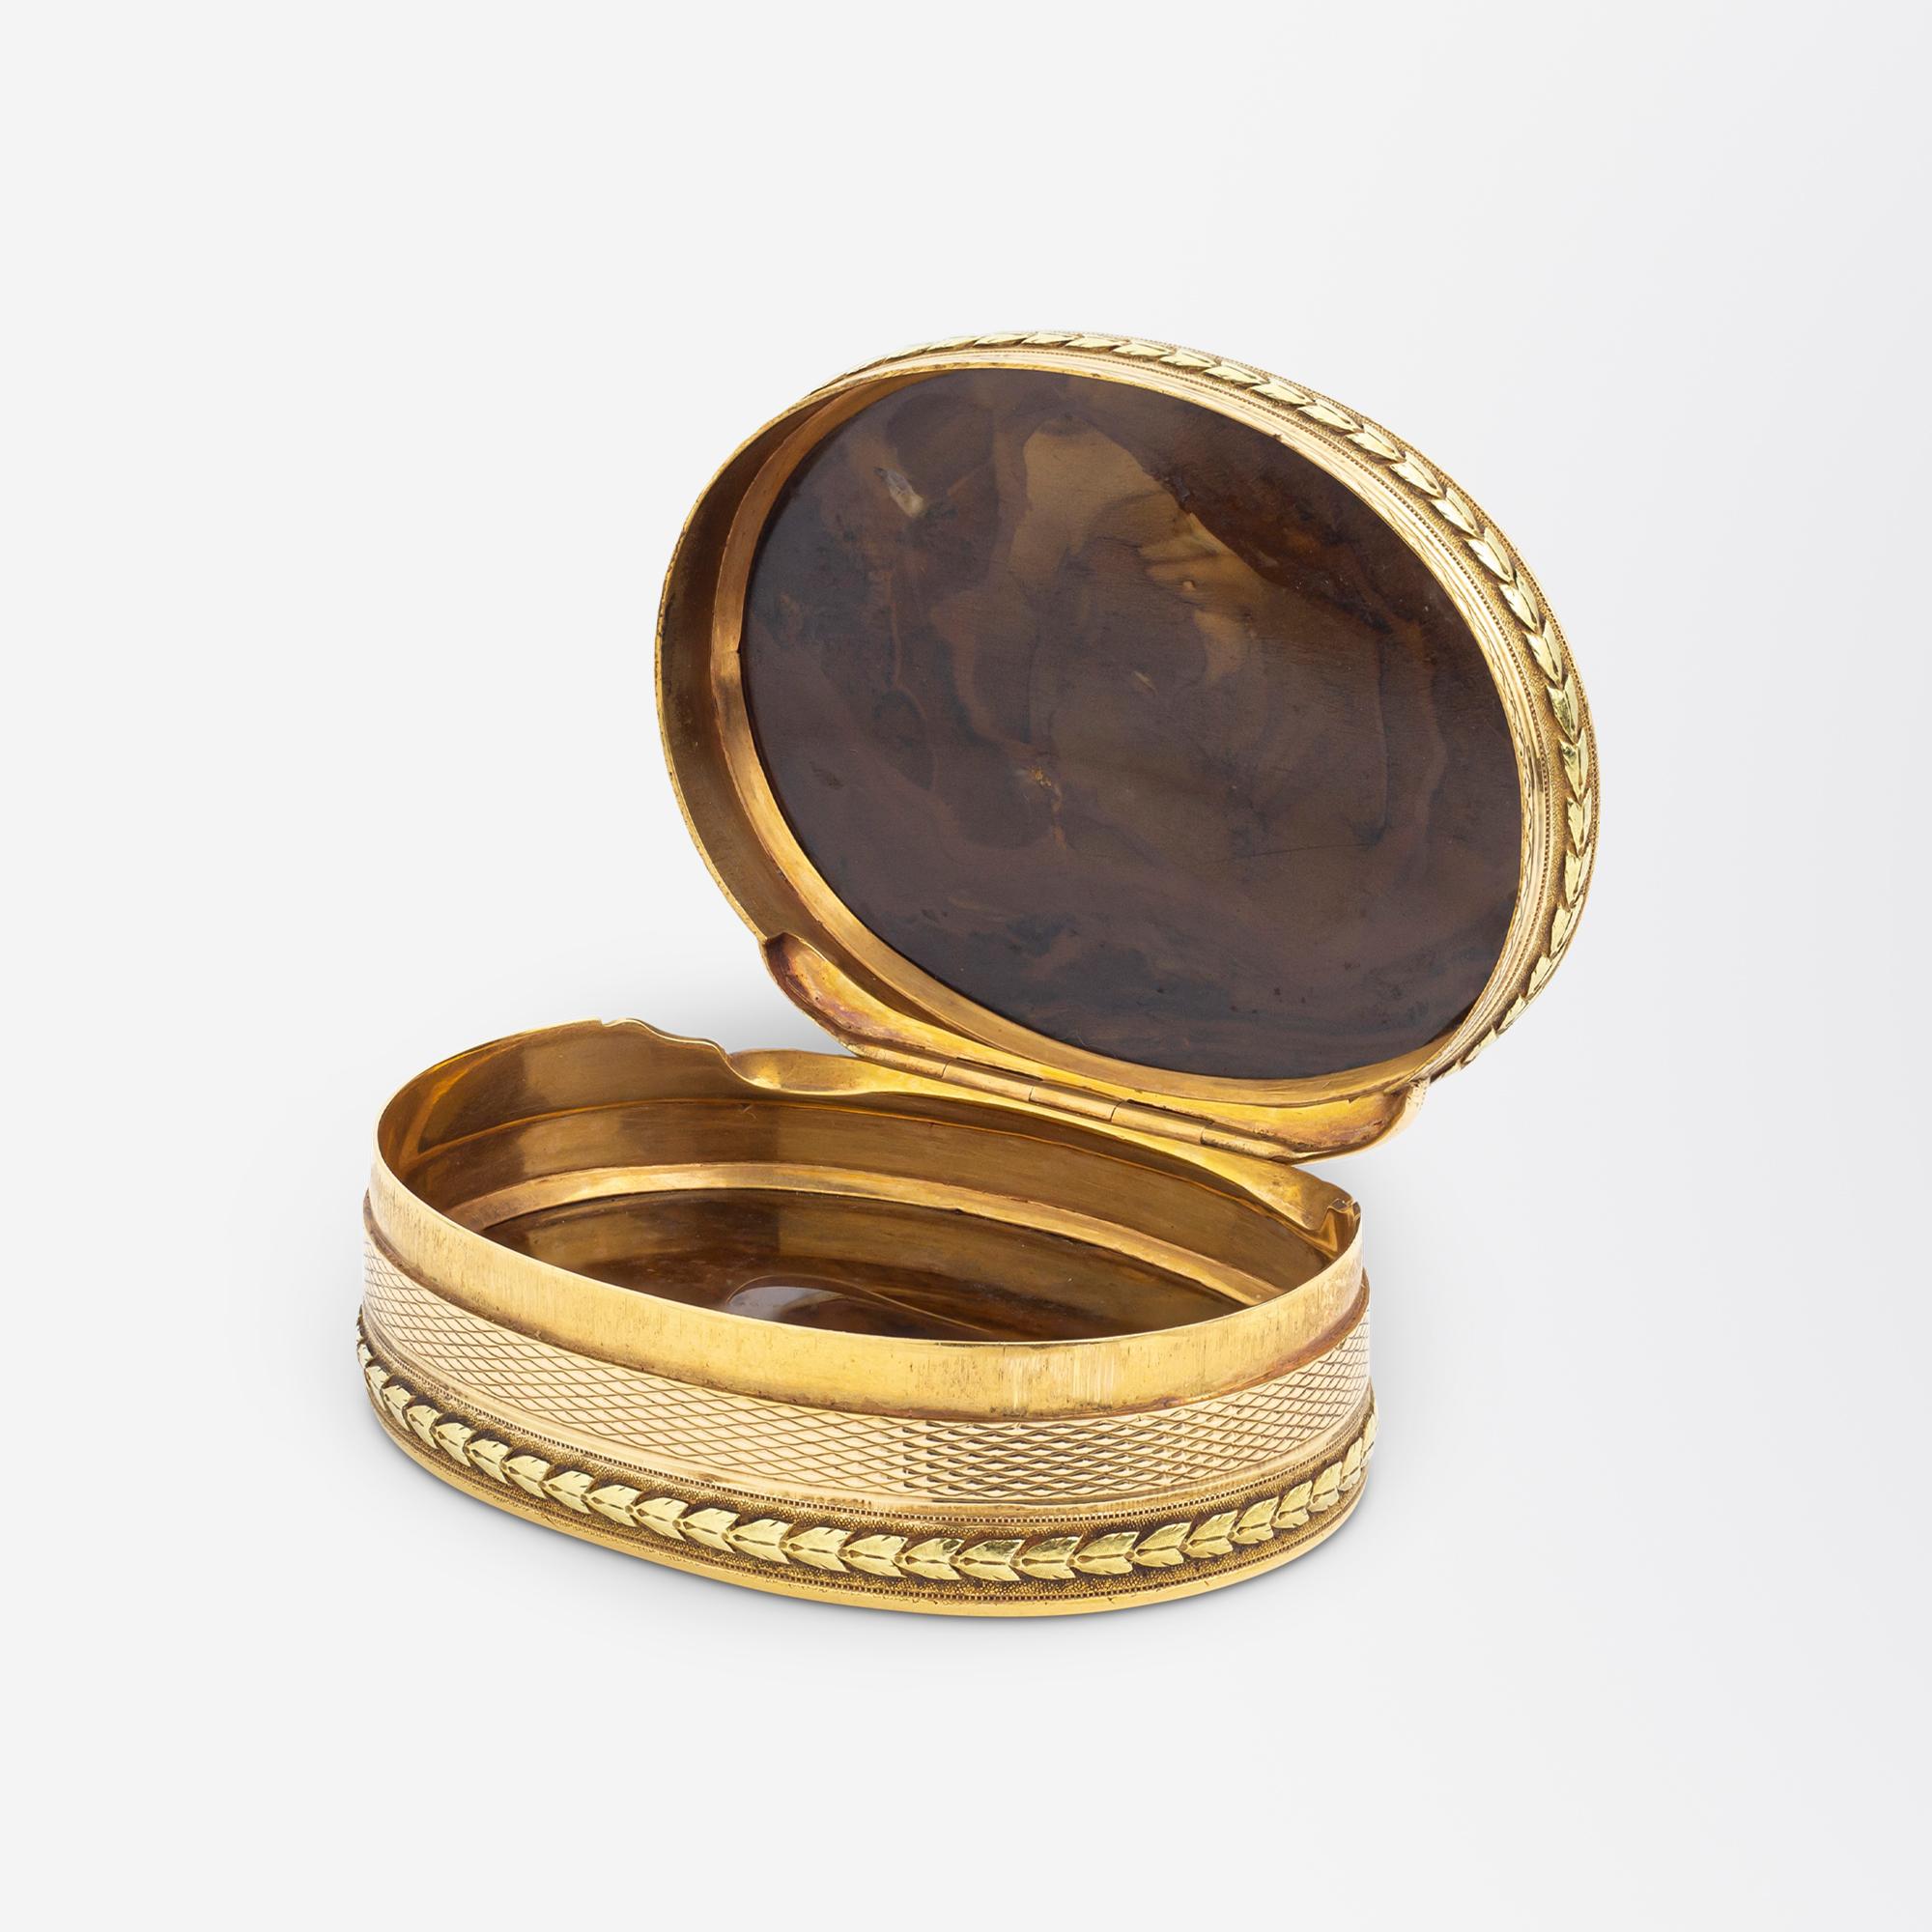 This rare and exceedingly beautiful snuff box dates to the second half of the 18th Century and was likely made in England. The oval box is crafted from 18 karat yellow and rose gold and has been set with two pieces of petrified wood agate. The lid